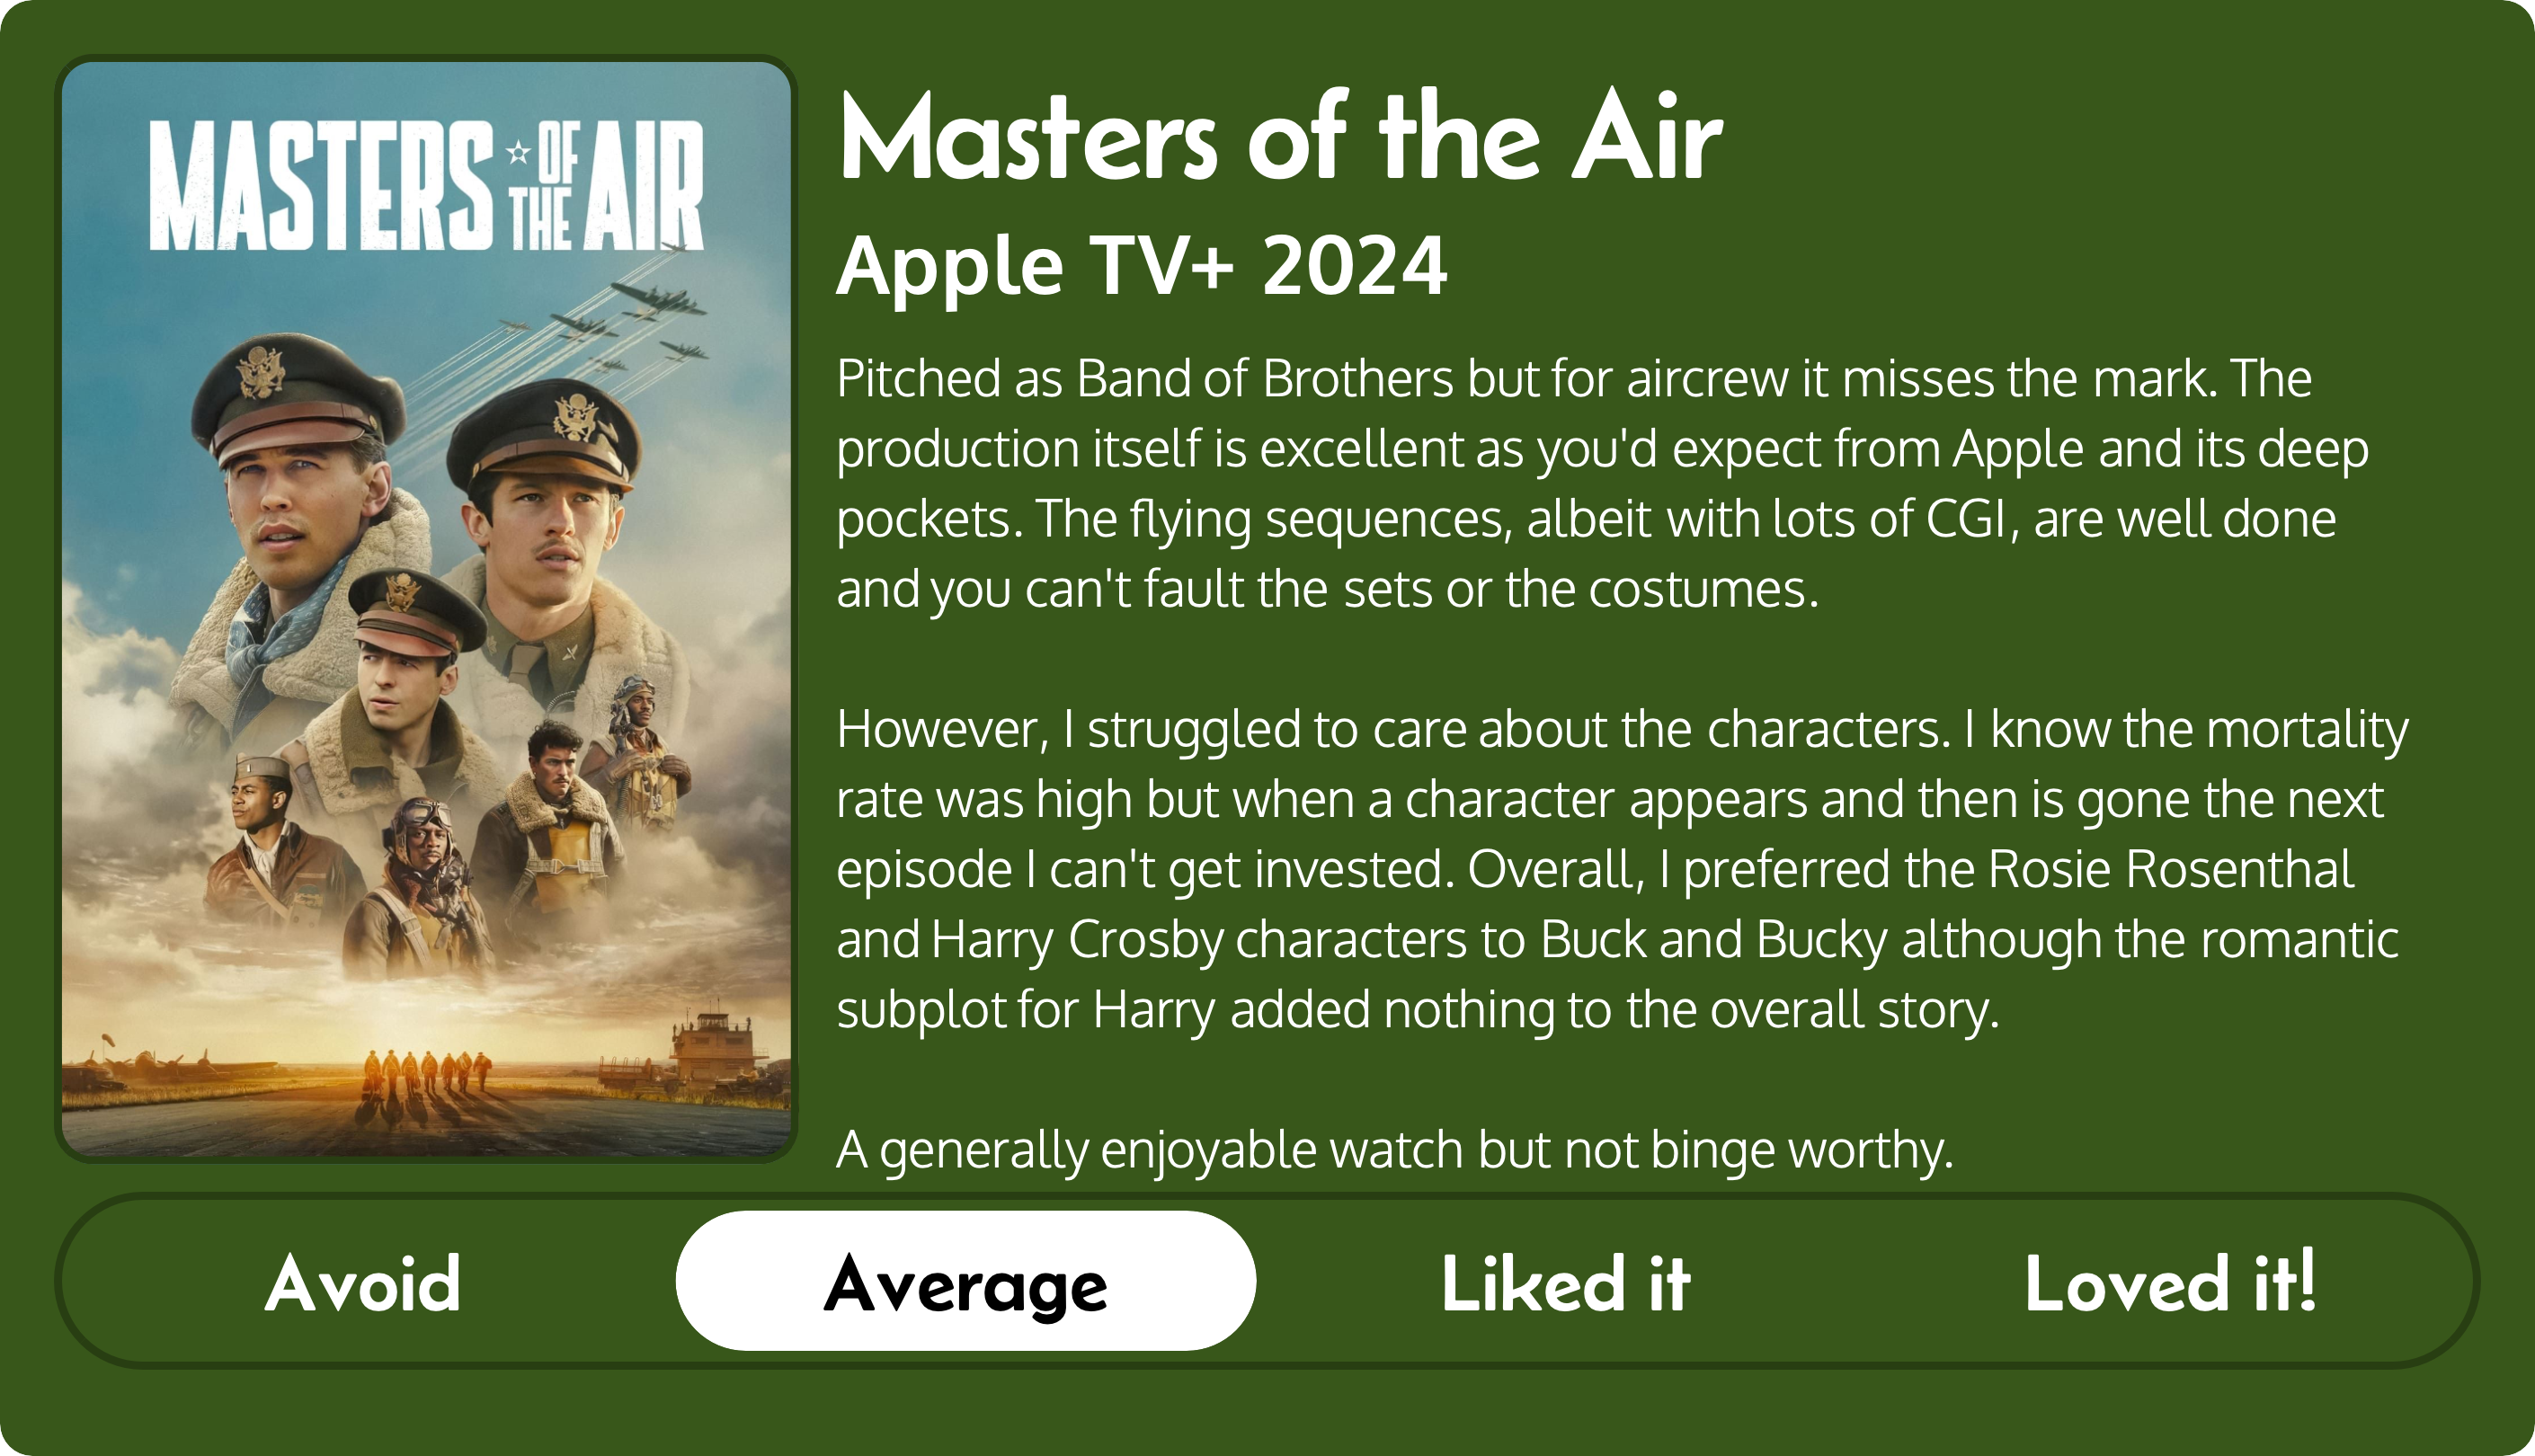 A review of the Apple TV+ series Masters of the Air (2024). Rated “Average”, the review reads “Pitched as Band of Brothers but for aircrew it misses the mark. The production itself is excellent as you'd expect from Apple and its deep pockets. The flying sequences, albeit with lots of CGI, are well done and you can't fault the sets or the costumes. However, I struggled to care about the characters. I know the mortality rate was high but when a character appears and then is gone the next episode I can't get invested. Overall, I preferred the Rosie Rosenthal and Harry Crosby characters to Buck and Bucky although the romantic subplot for Harry added nothing to the overall story. A generally enjoyable watch but not binge worthy.”